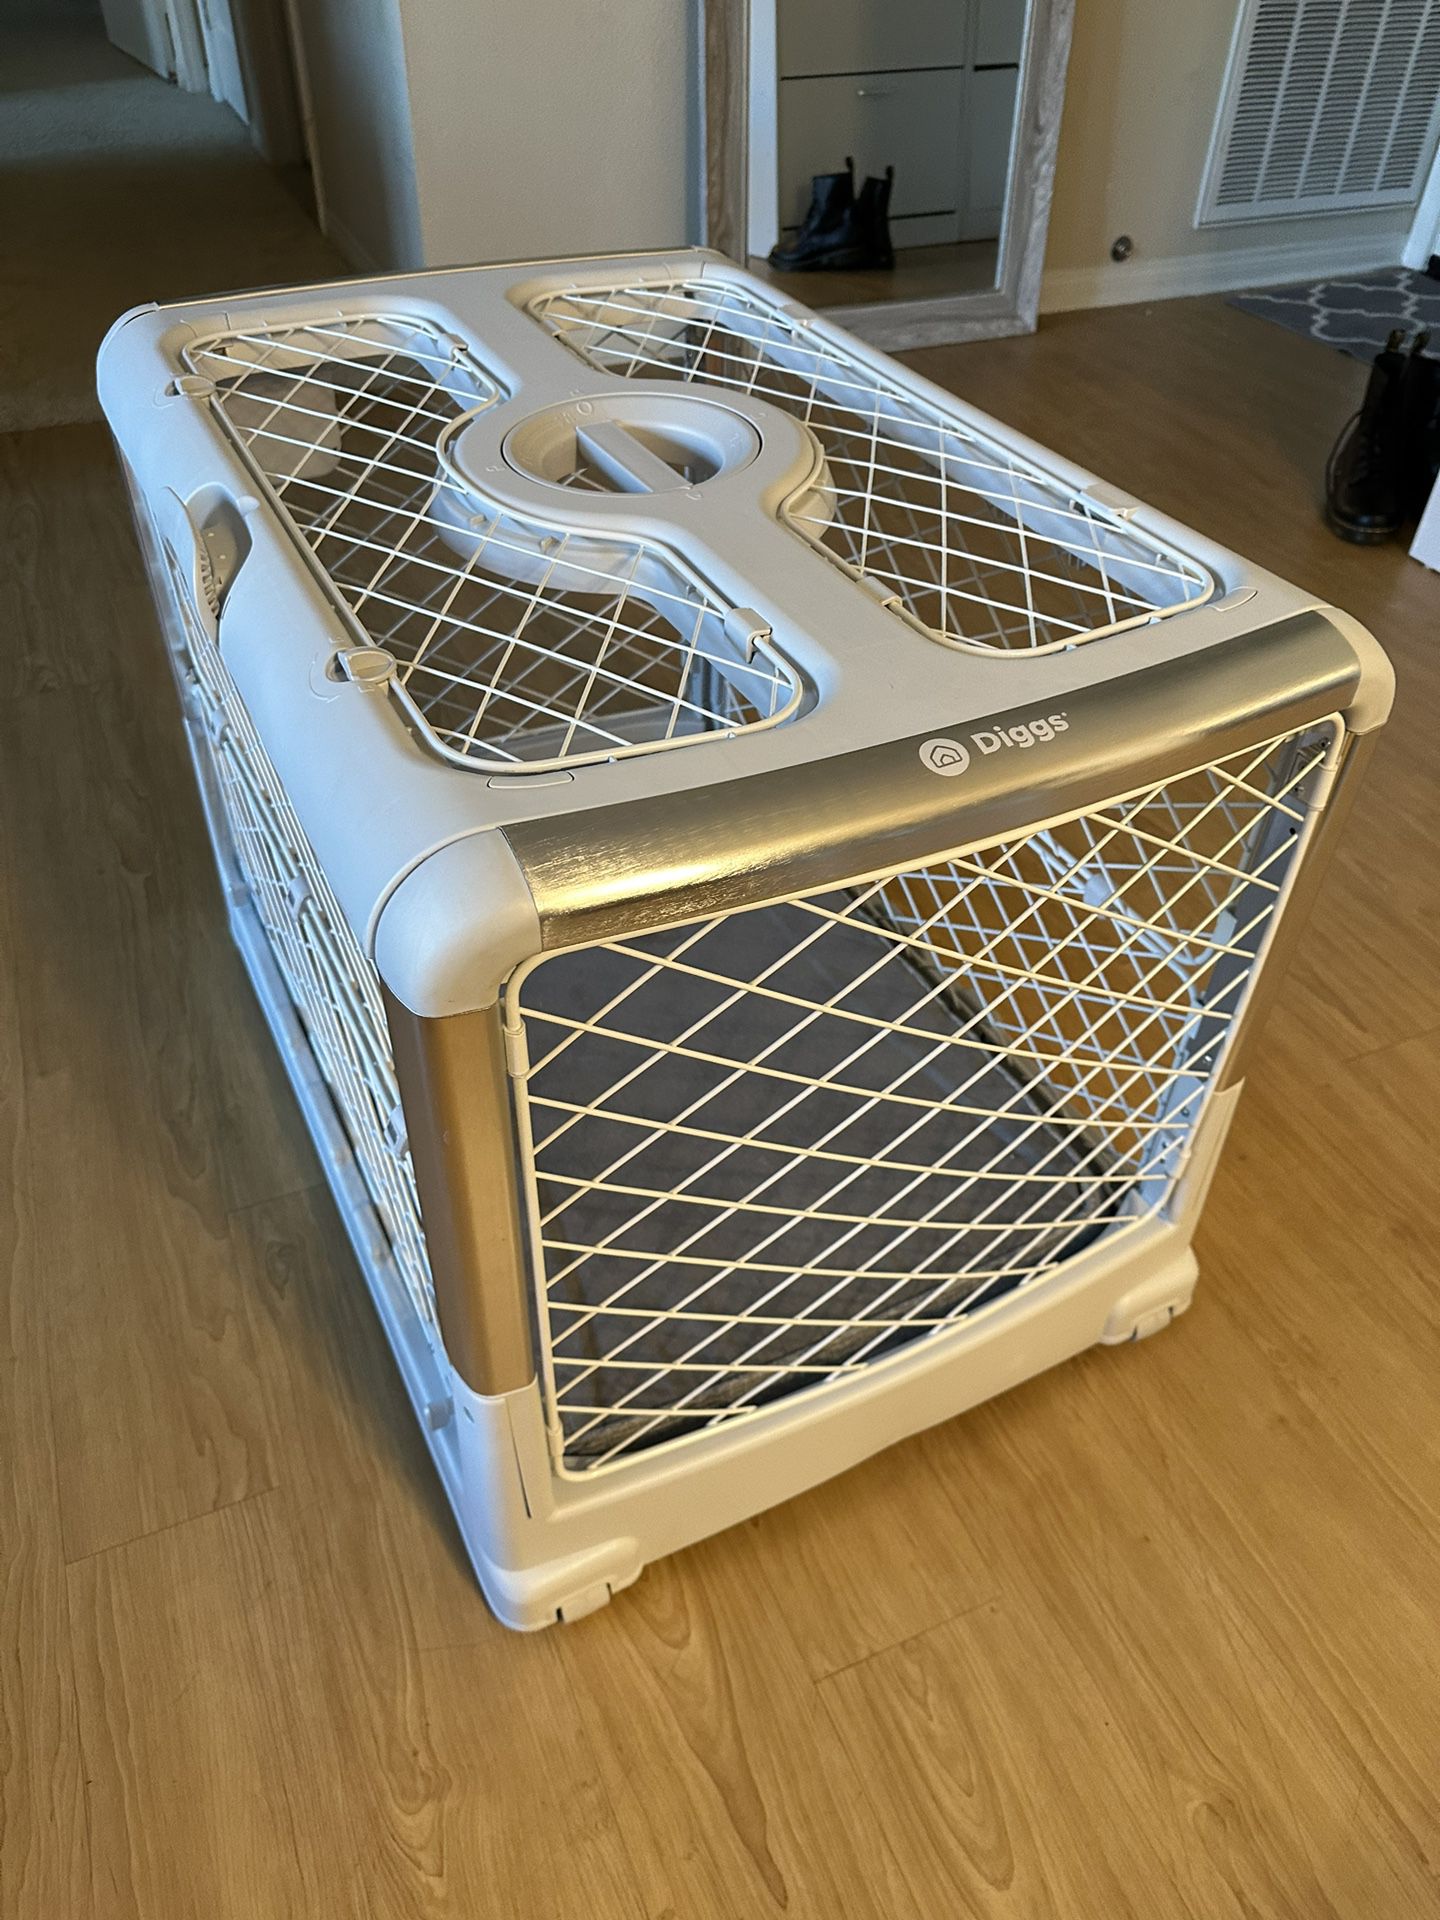 Diggs Revol Collapsible Portable dog crate